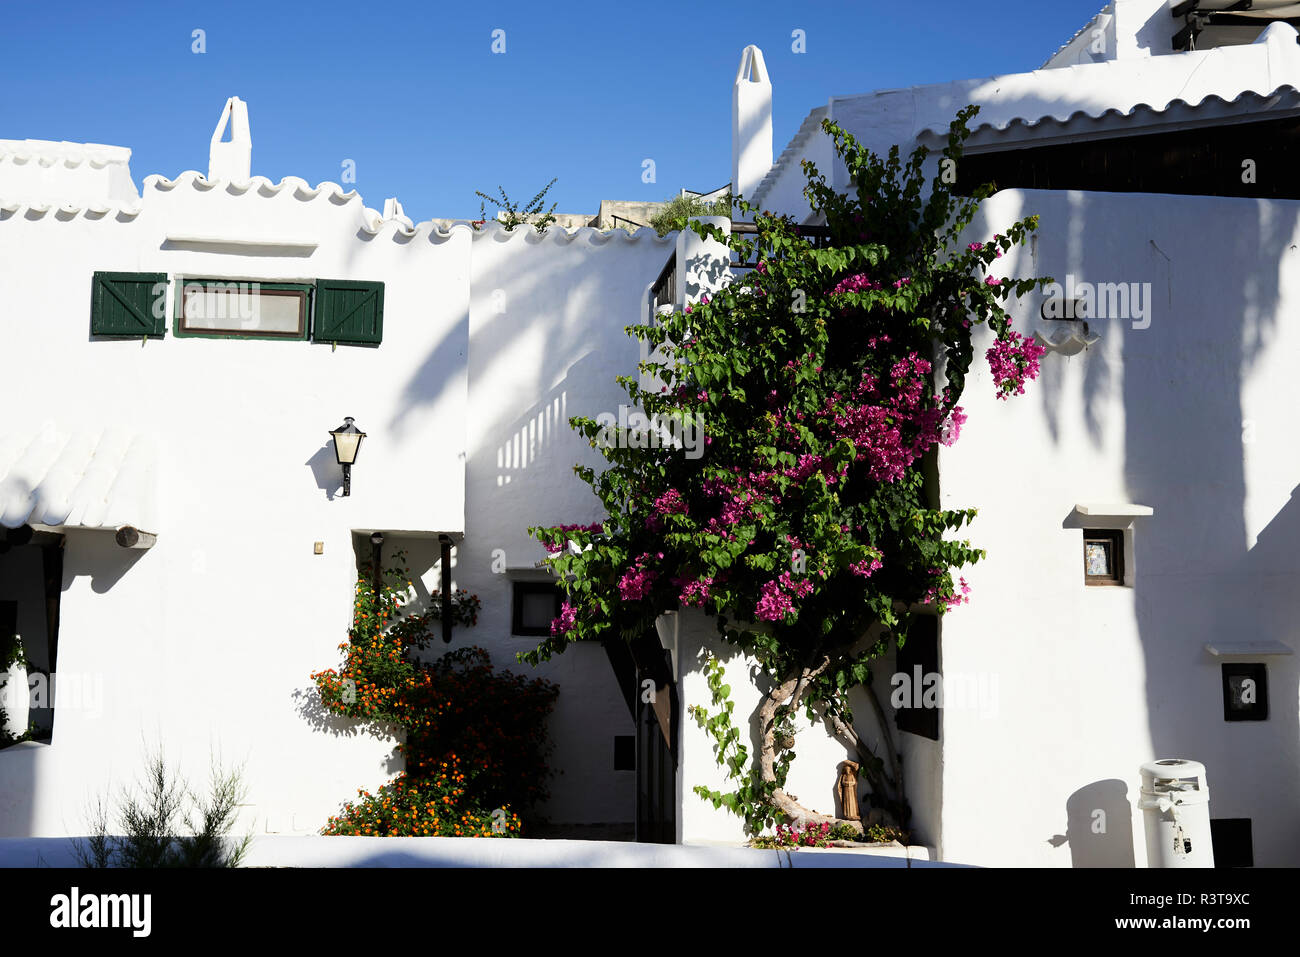 Spain, Menorca, Binibequer, blooming plants at facades Stock Photo